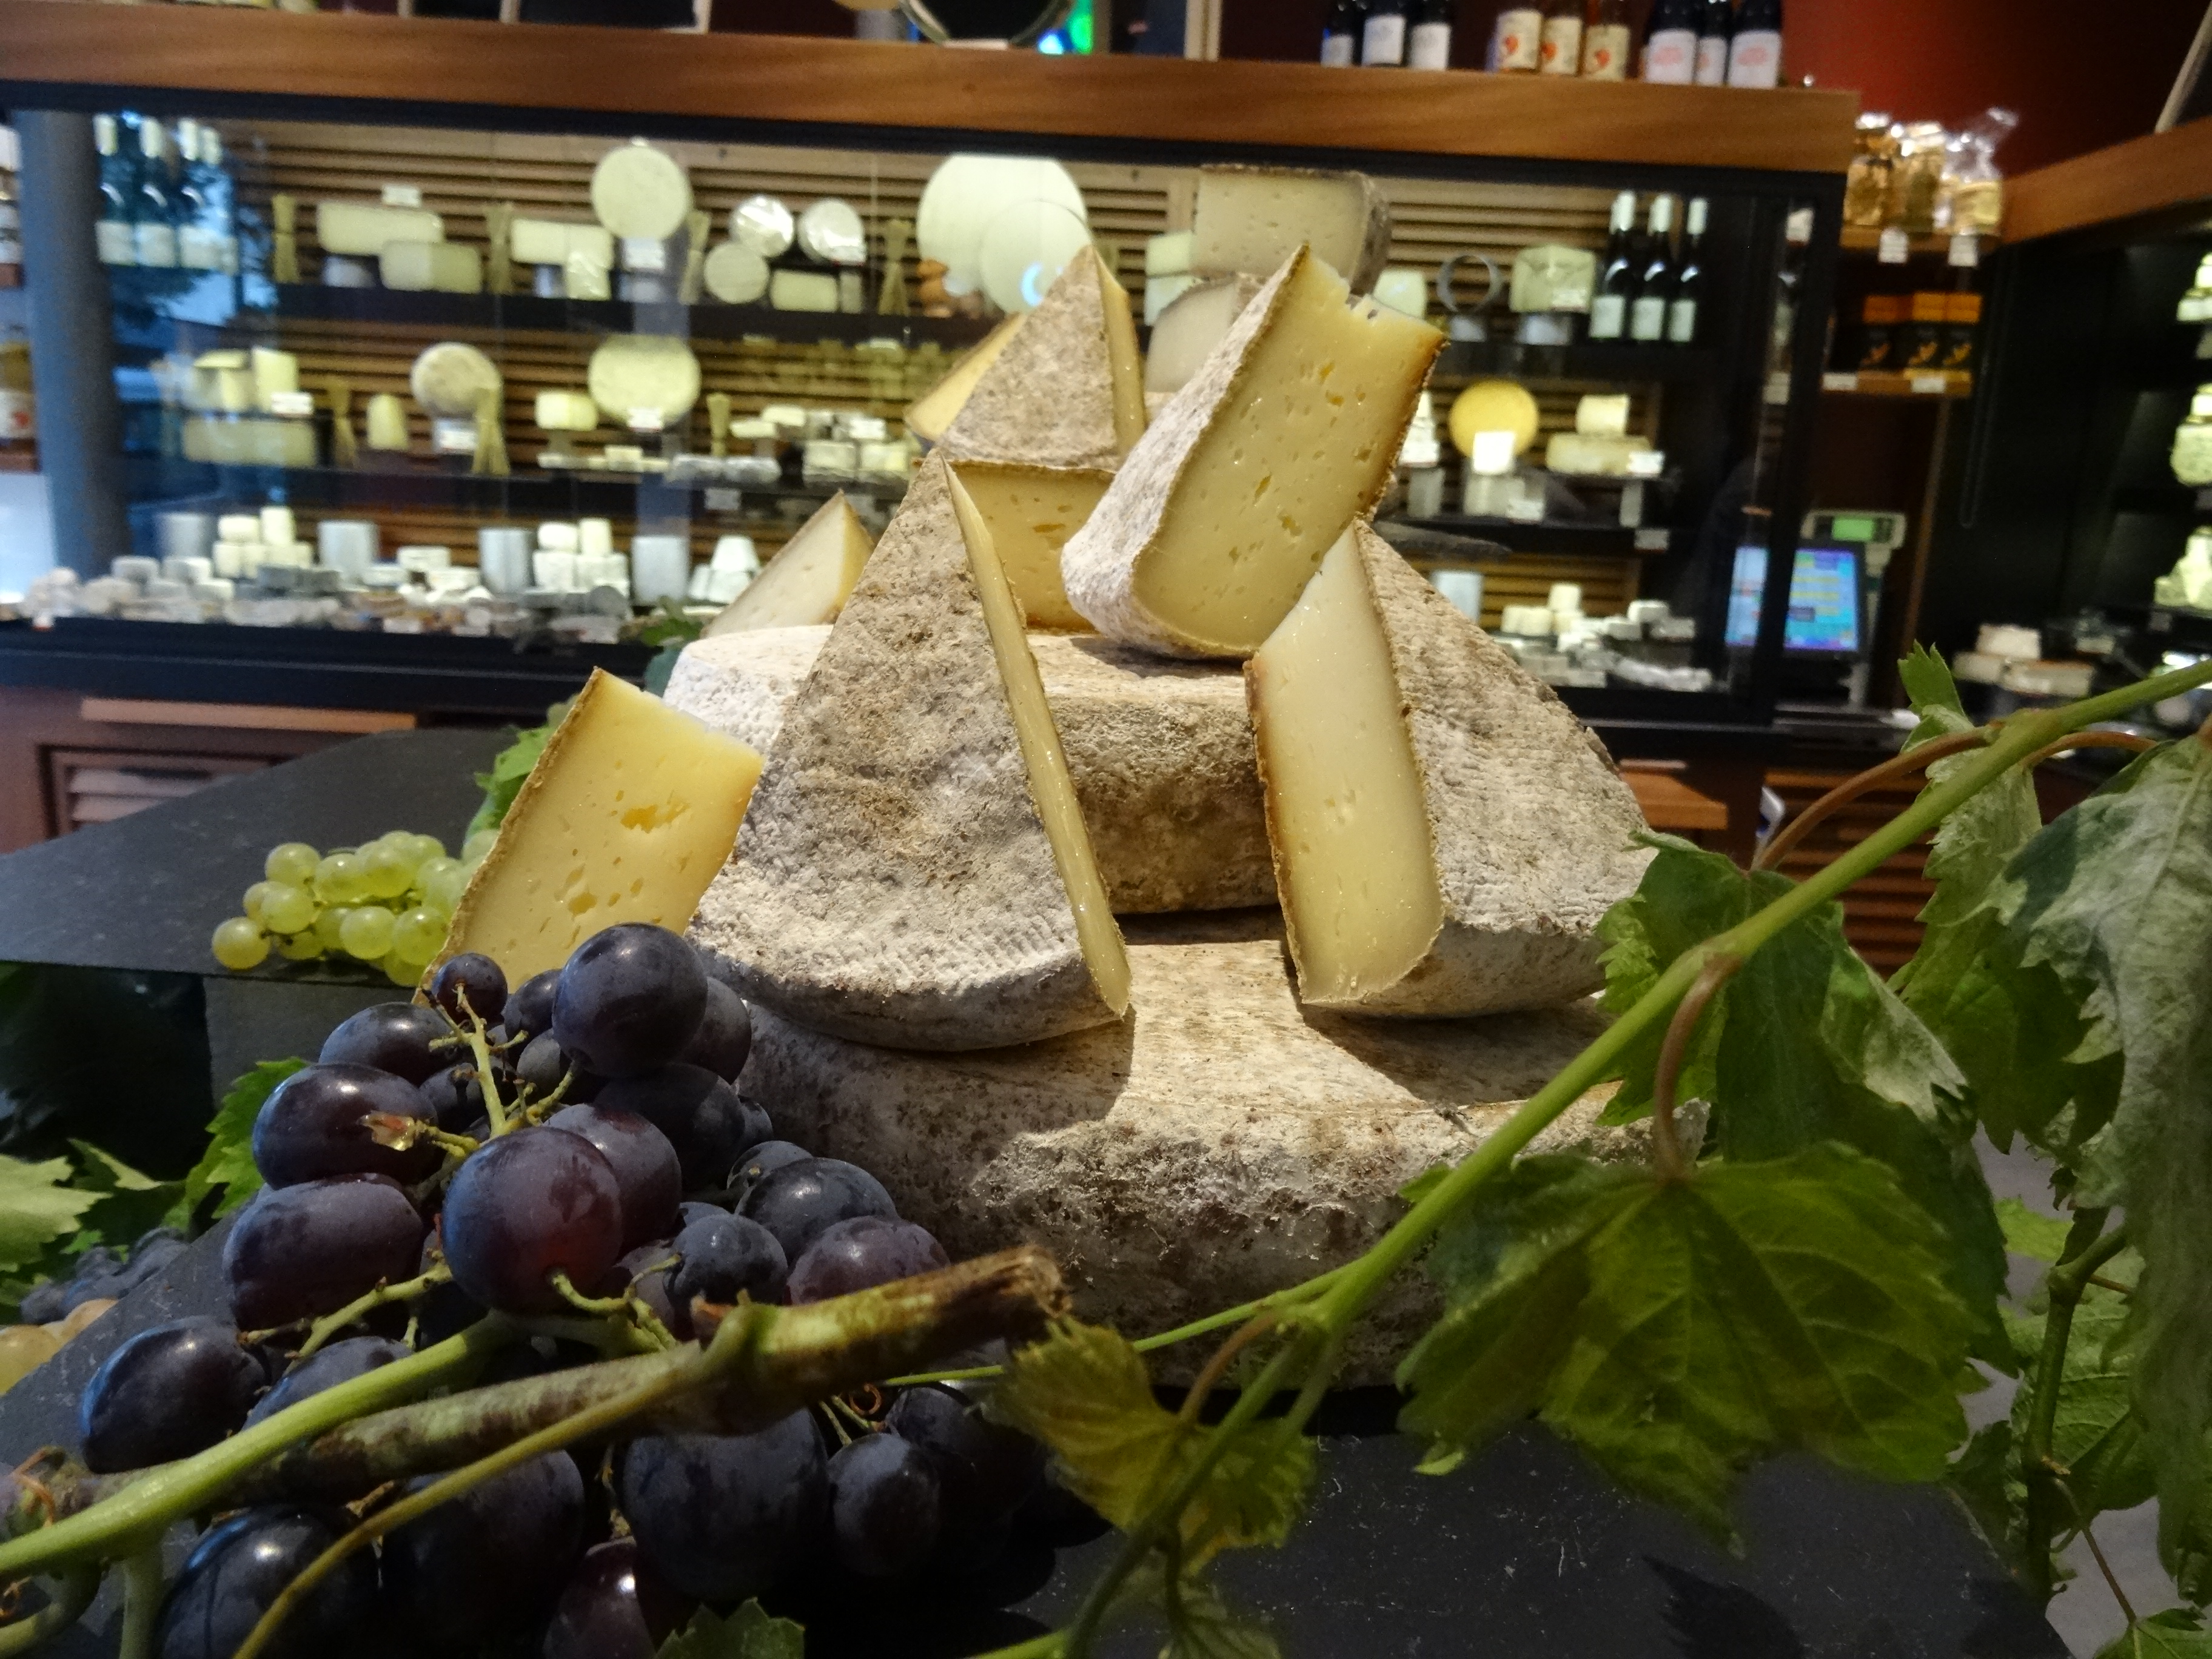 MyFrenchLife™ - MyFrenchLife.org - Paris Mosaic - artisans in Paris - Androuet Fromagerie - Cheese shops in Paris - French cheese - grapes